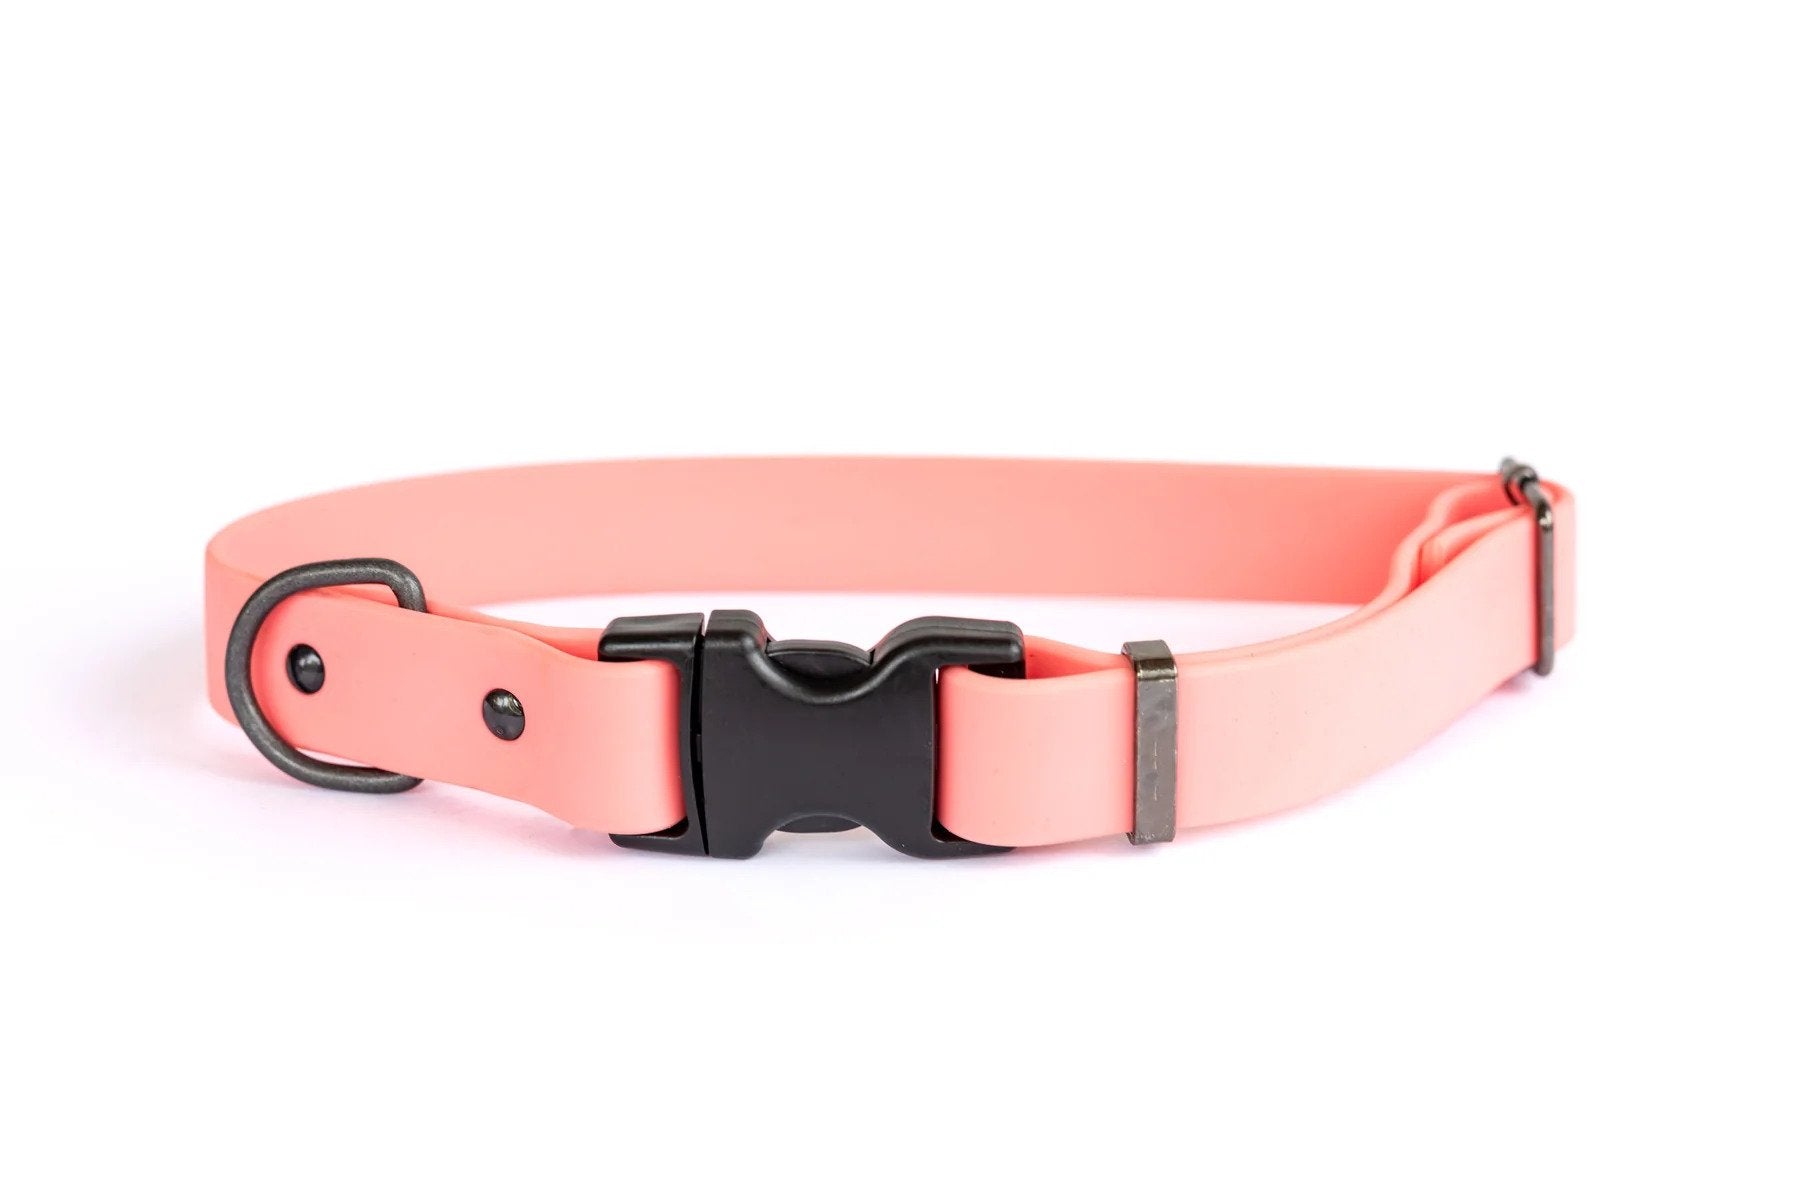 Eurodog Collars Waterproof Soft PVC Coated Nylon Quick Release Buckle Dog Collar Coral